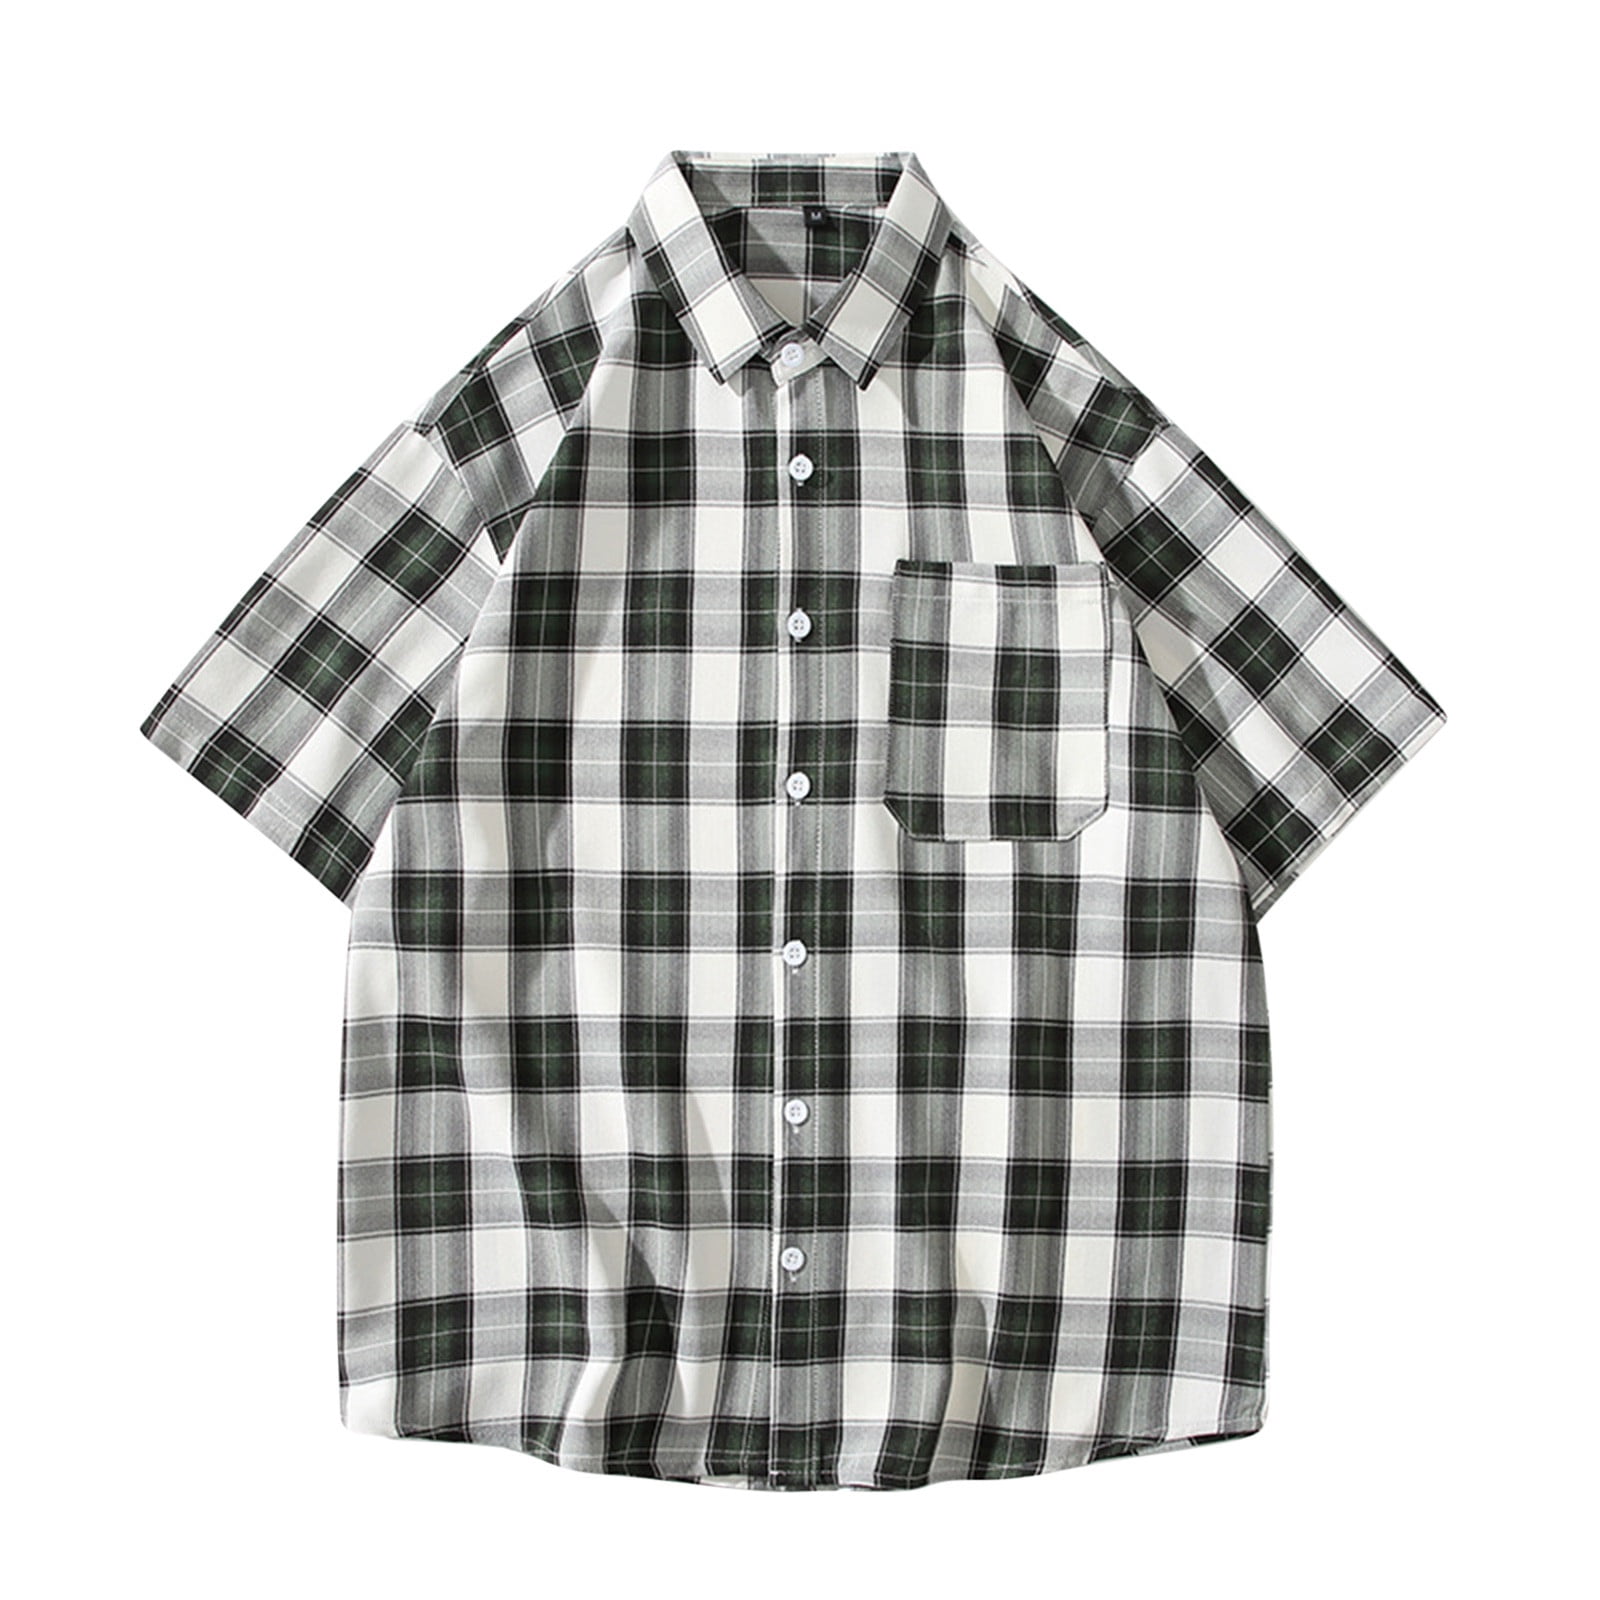 YYDGH Men's Plaid Short Sleeve Button Down Shirts Casual Cotton Classic  Dress Shirts with Pocket Green M 